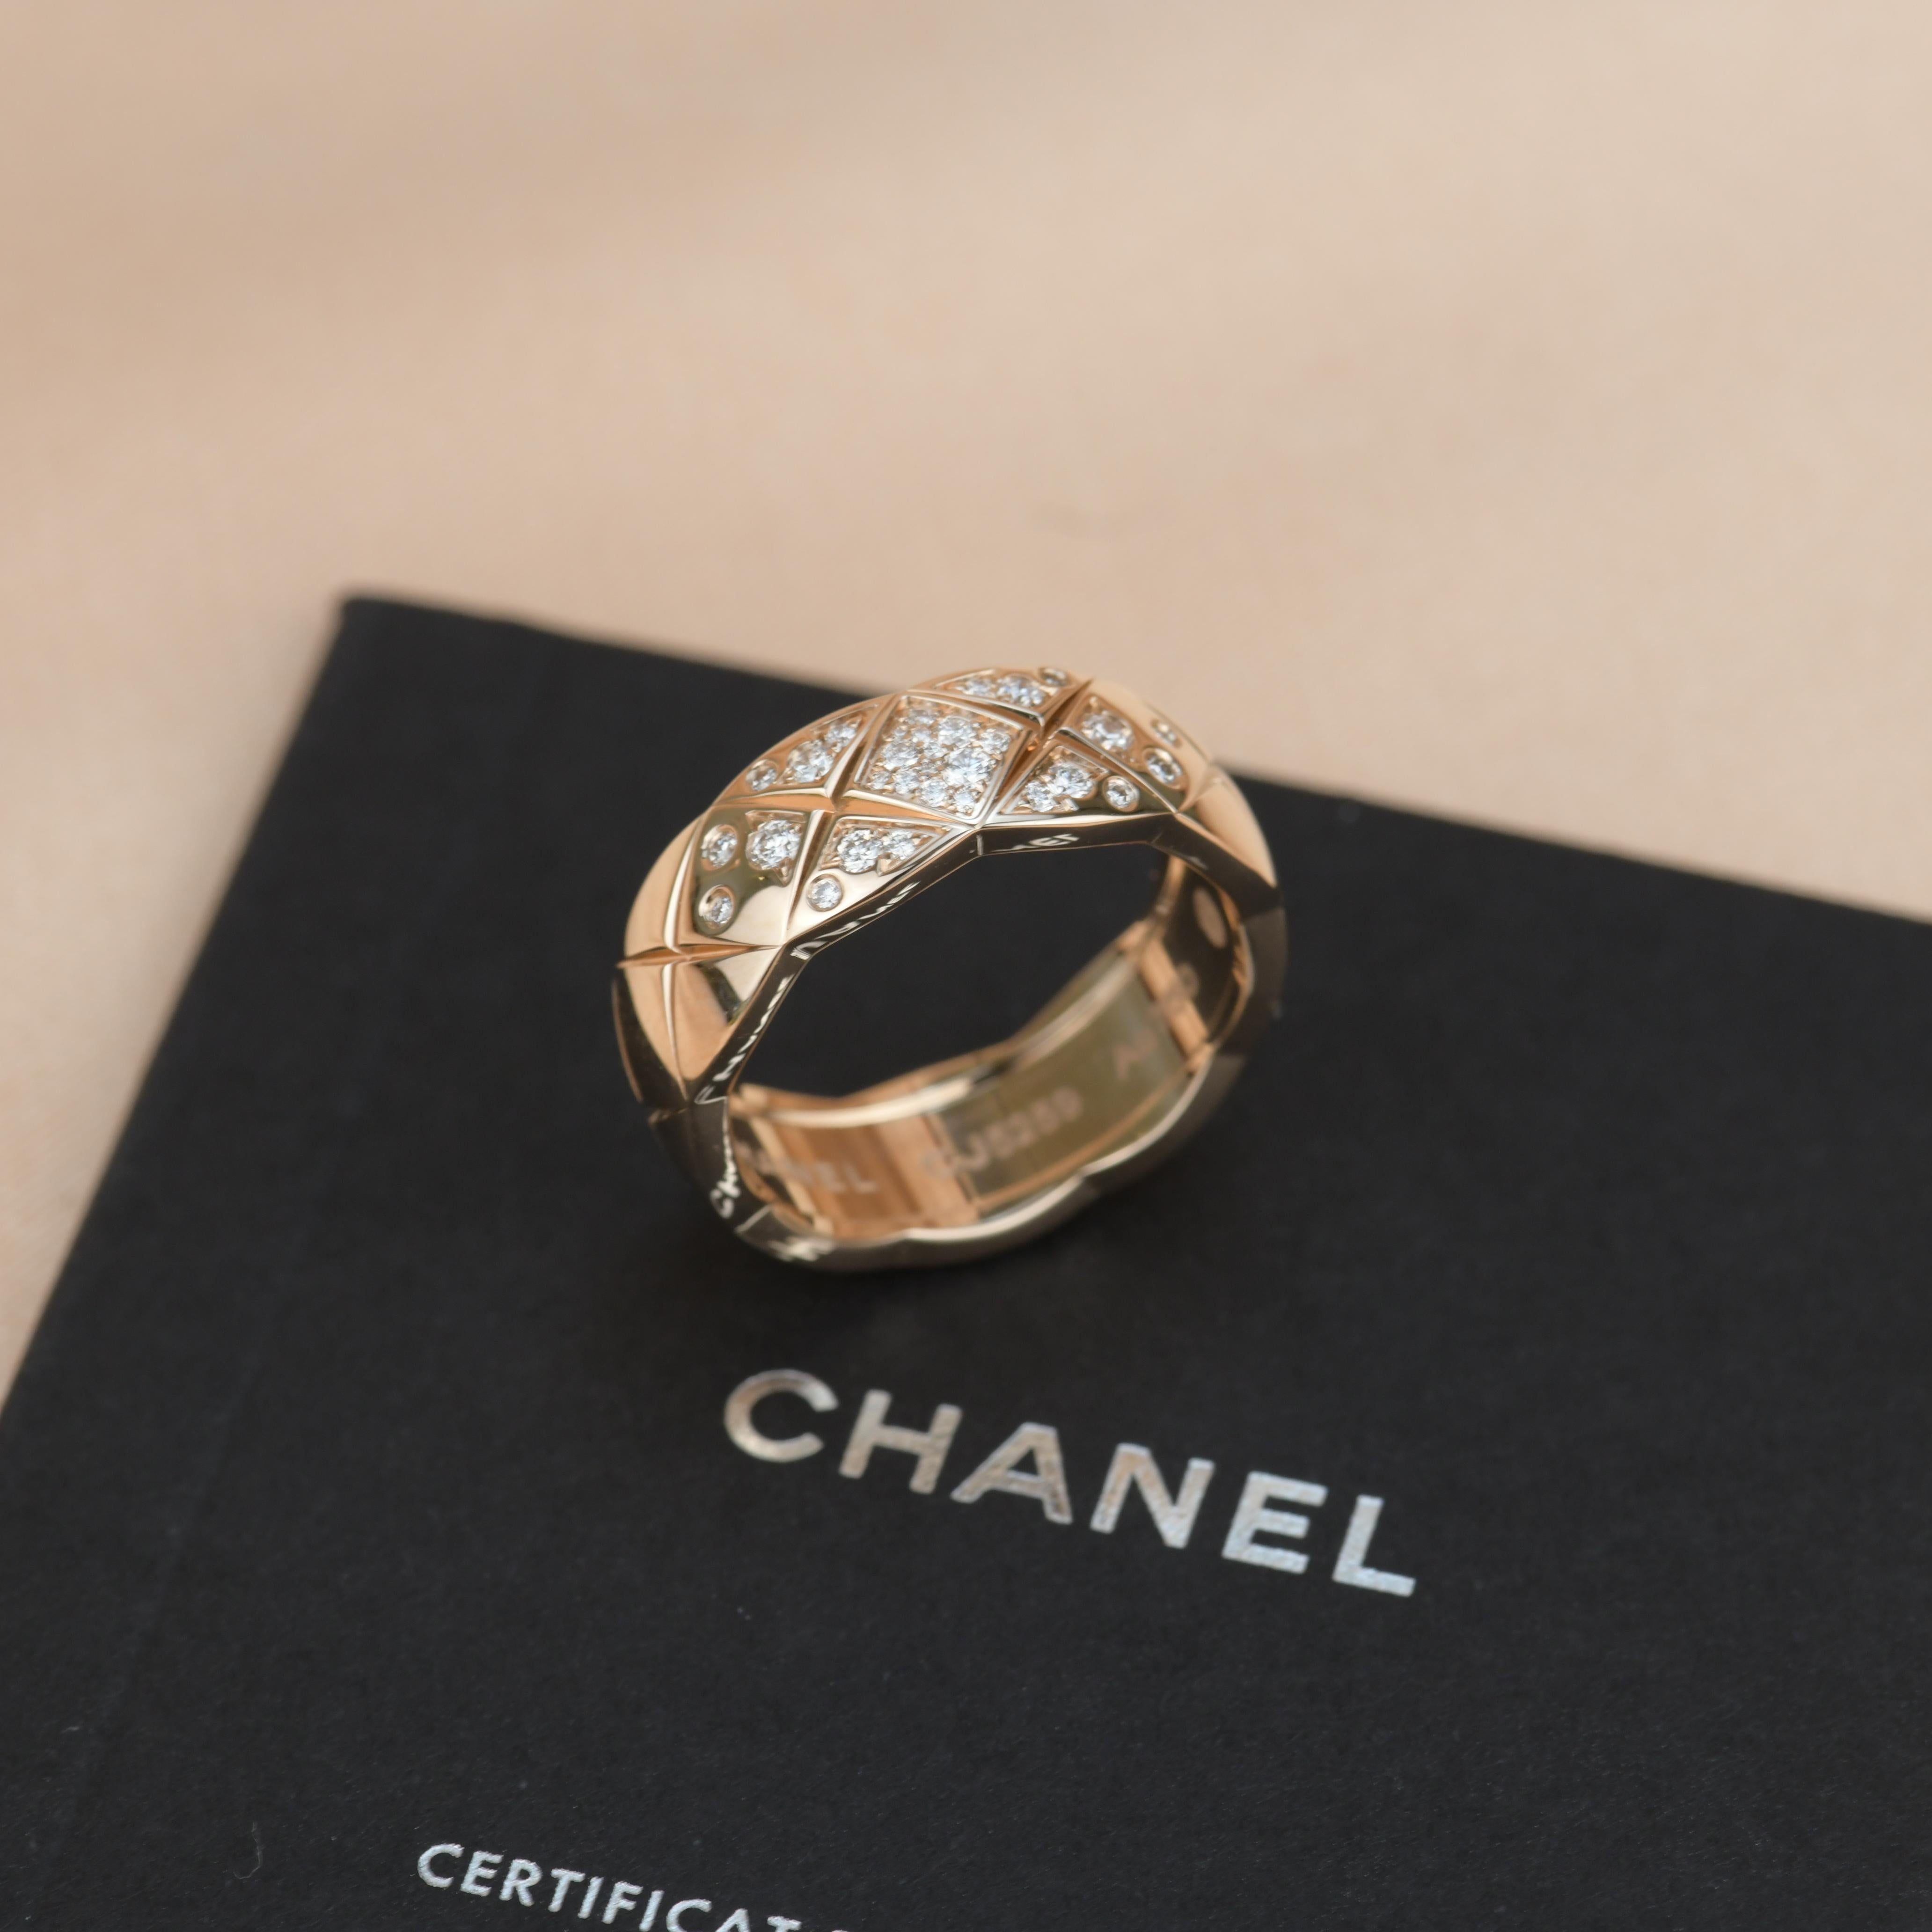 Chanel Small Rose Gold Diamond Coco Crush Ring In Excellent Condition For Sale In Banbury, GB